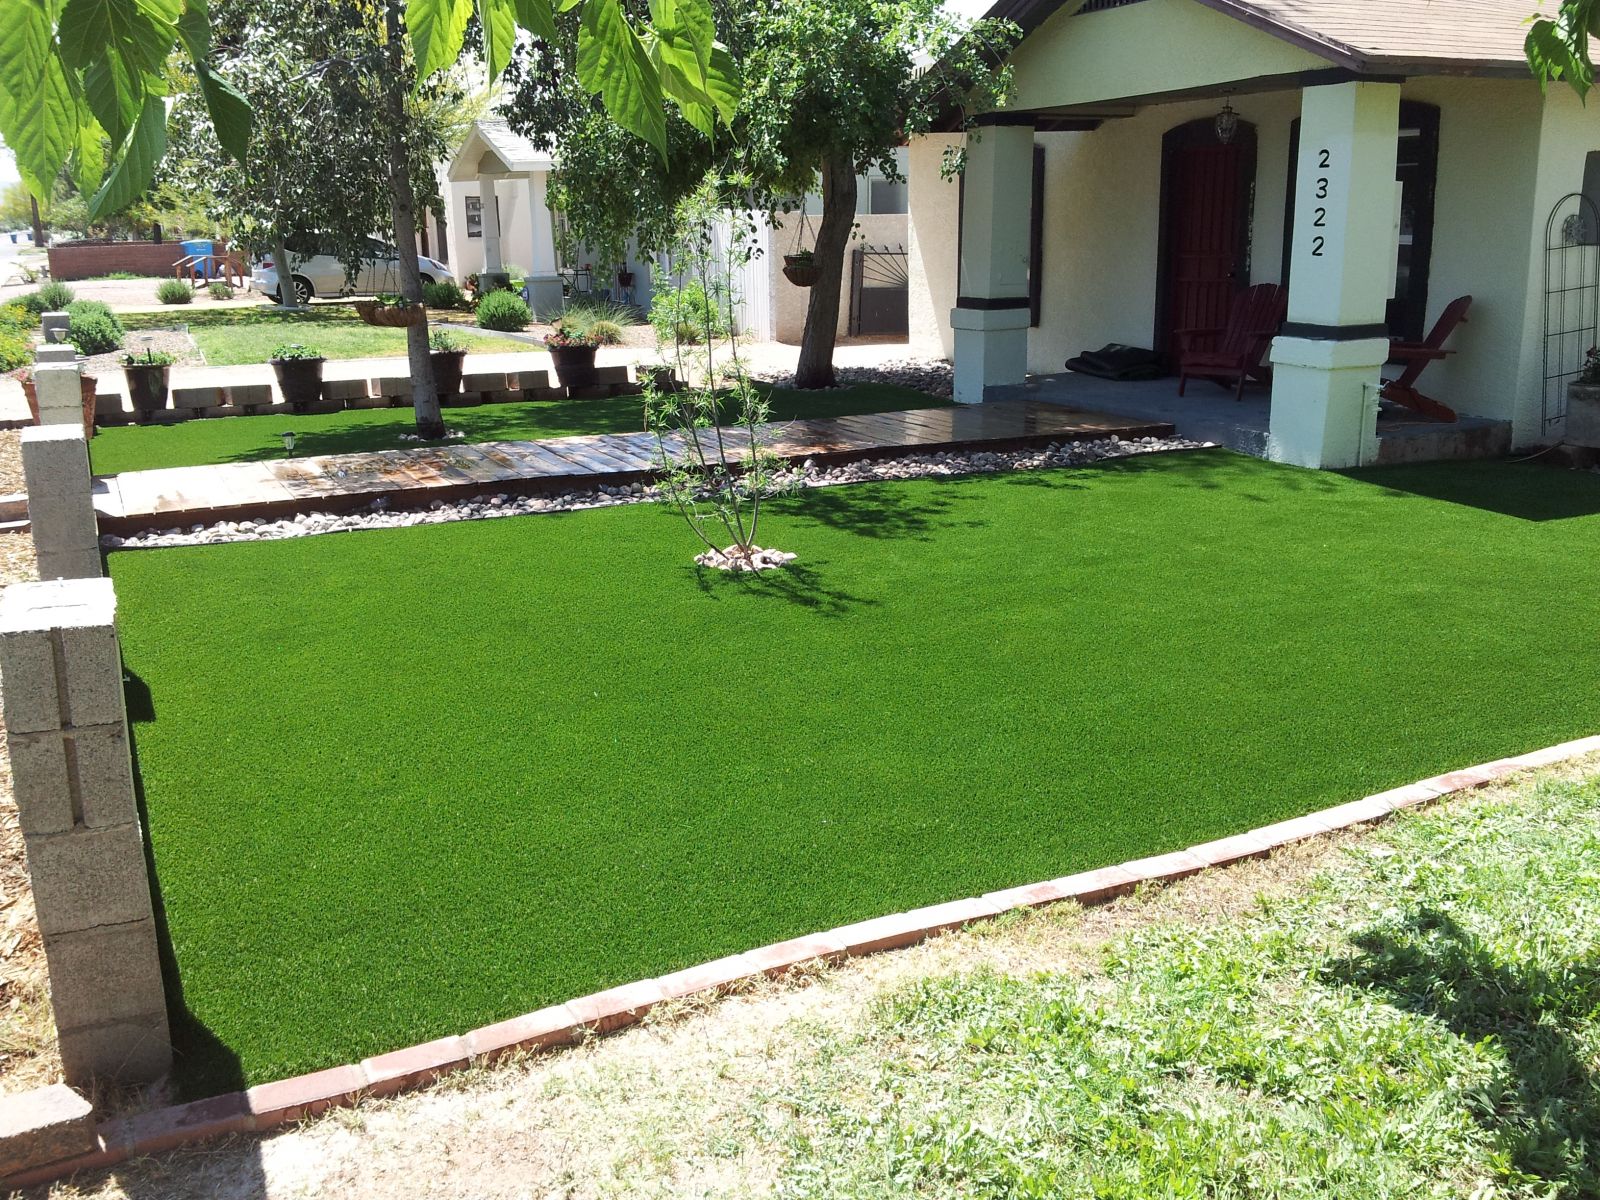 Luxury Turf the Best Choice for Artificial Turf in Queen Creek